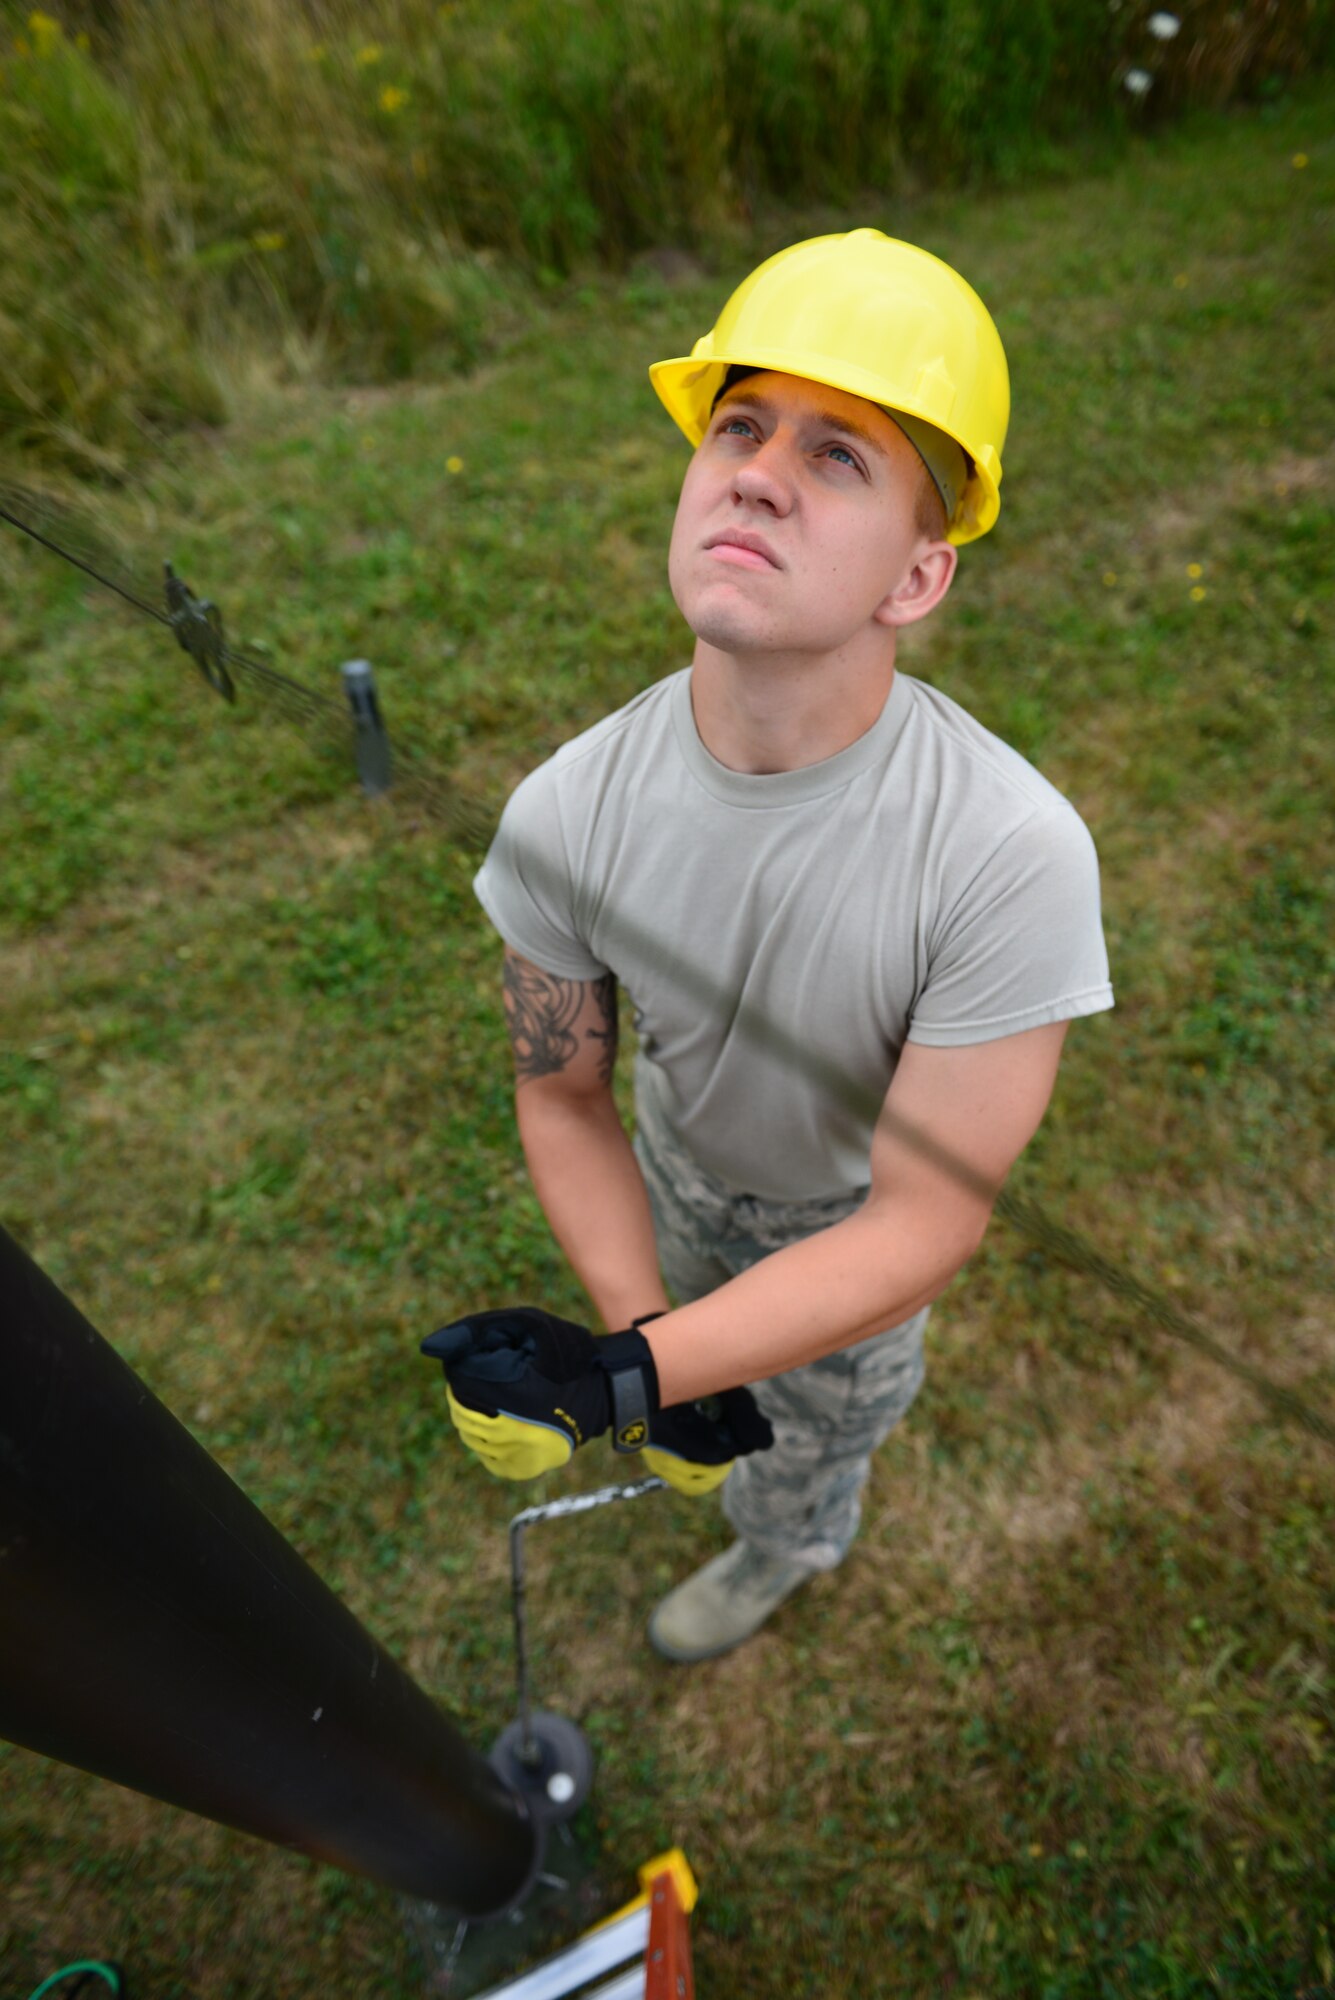 Senior Airman Matthew Barricklow with the 157th Communications Flight, New Hampshire Air National Guard, adjusts the height of a radio communication antenna during a training exercise at the New Hampshire Air National Guard Training Site in Center Stratford, N.H., Aug. 6. The antenna was part of the Joint Incident Site Communications Capability (JISCC) that was used to execute the exercise in support of domestic operations. (Air National Guard photo by Senior Airmen Kayla McWalter)